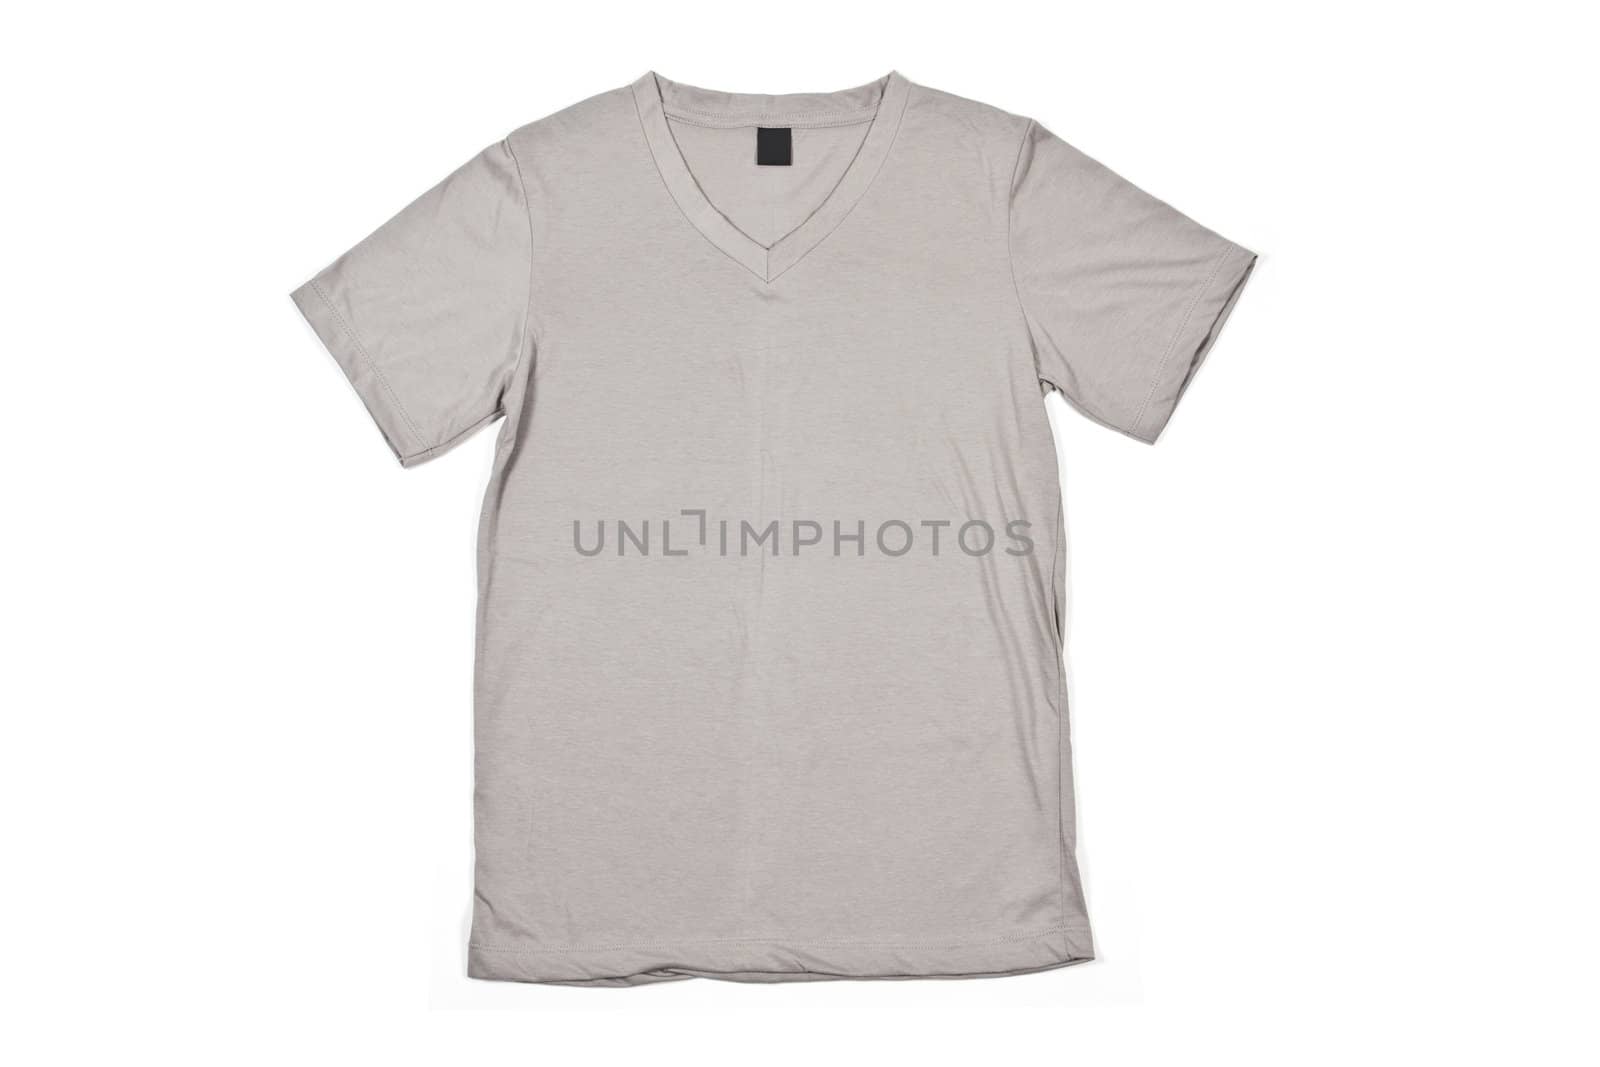 A blank gray tee shirt isolated on a white background